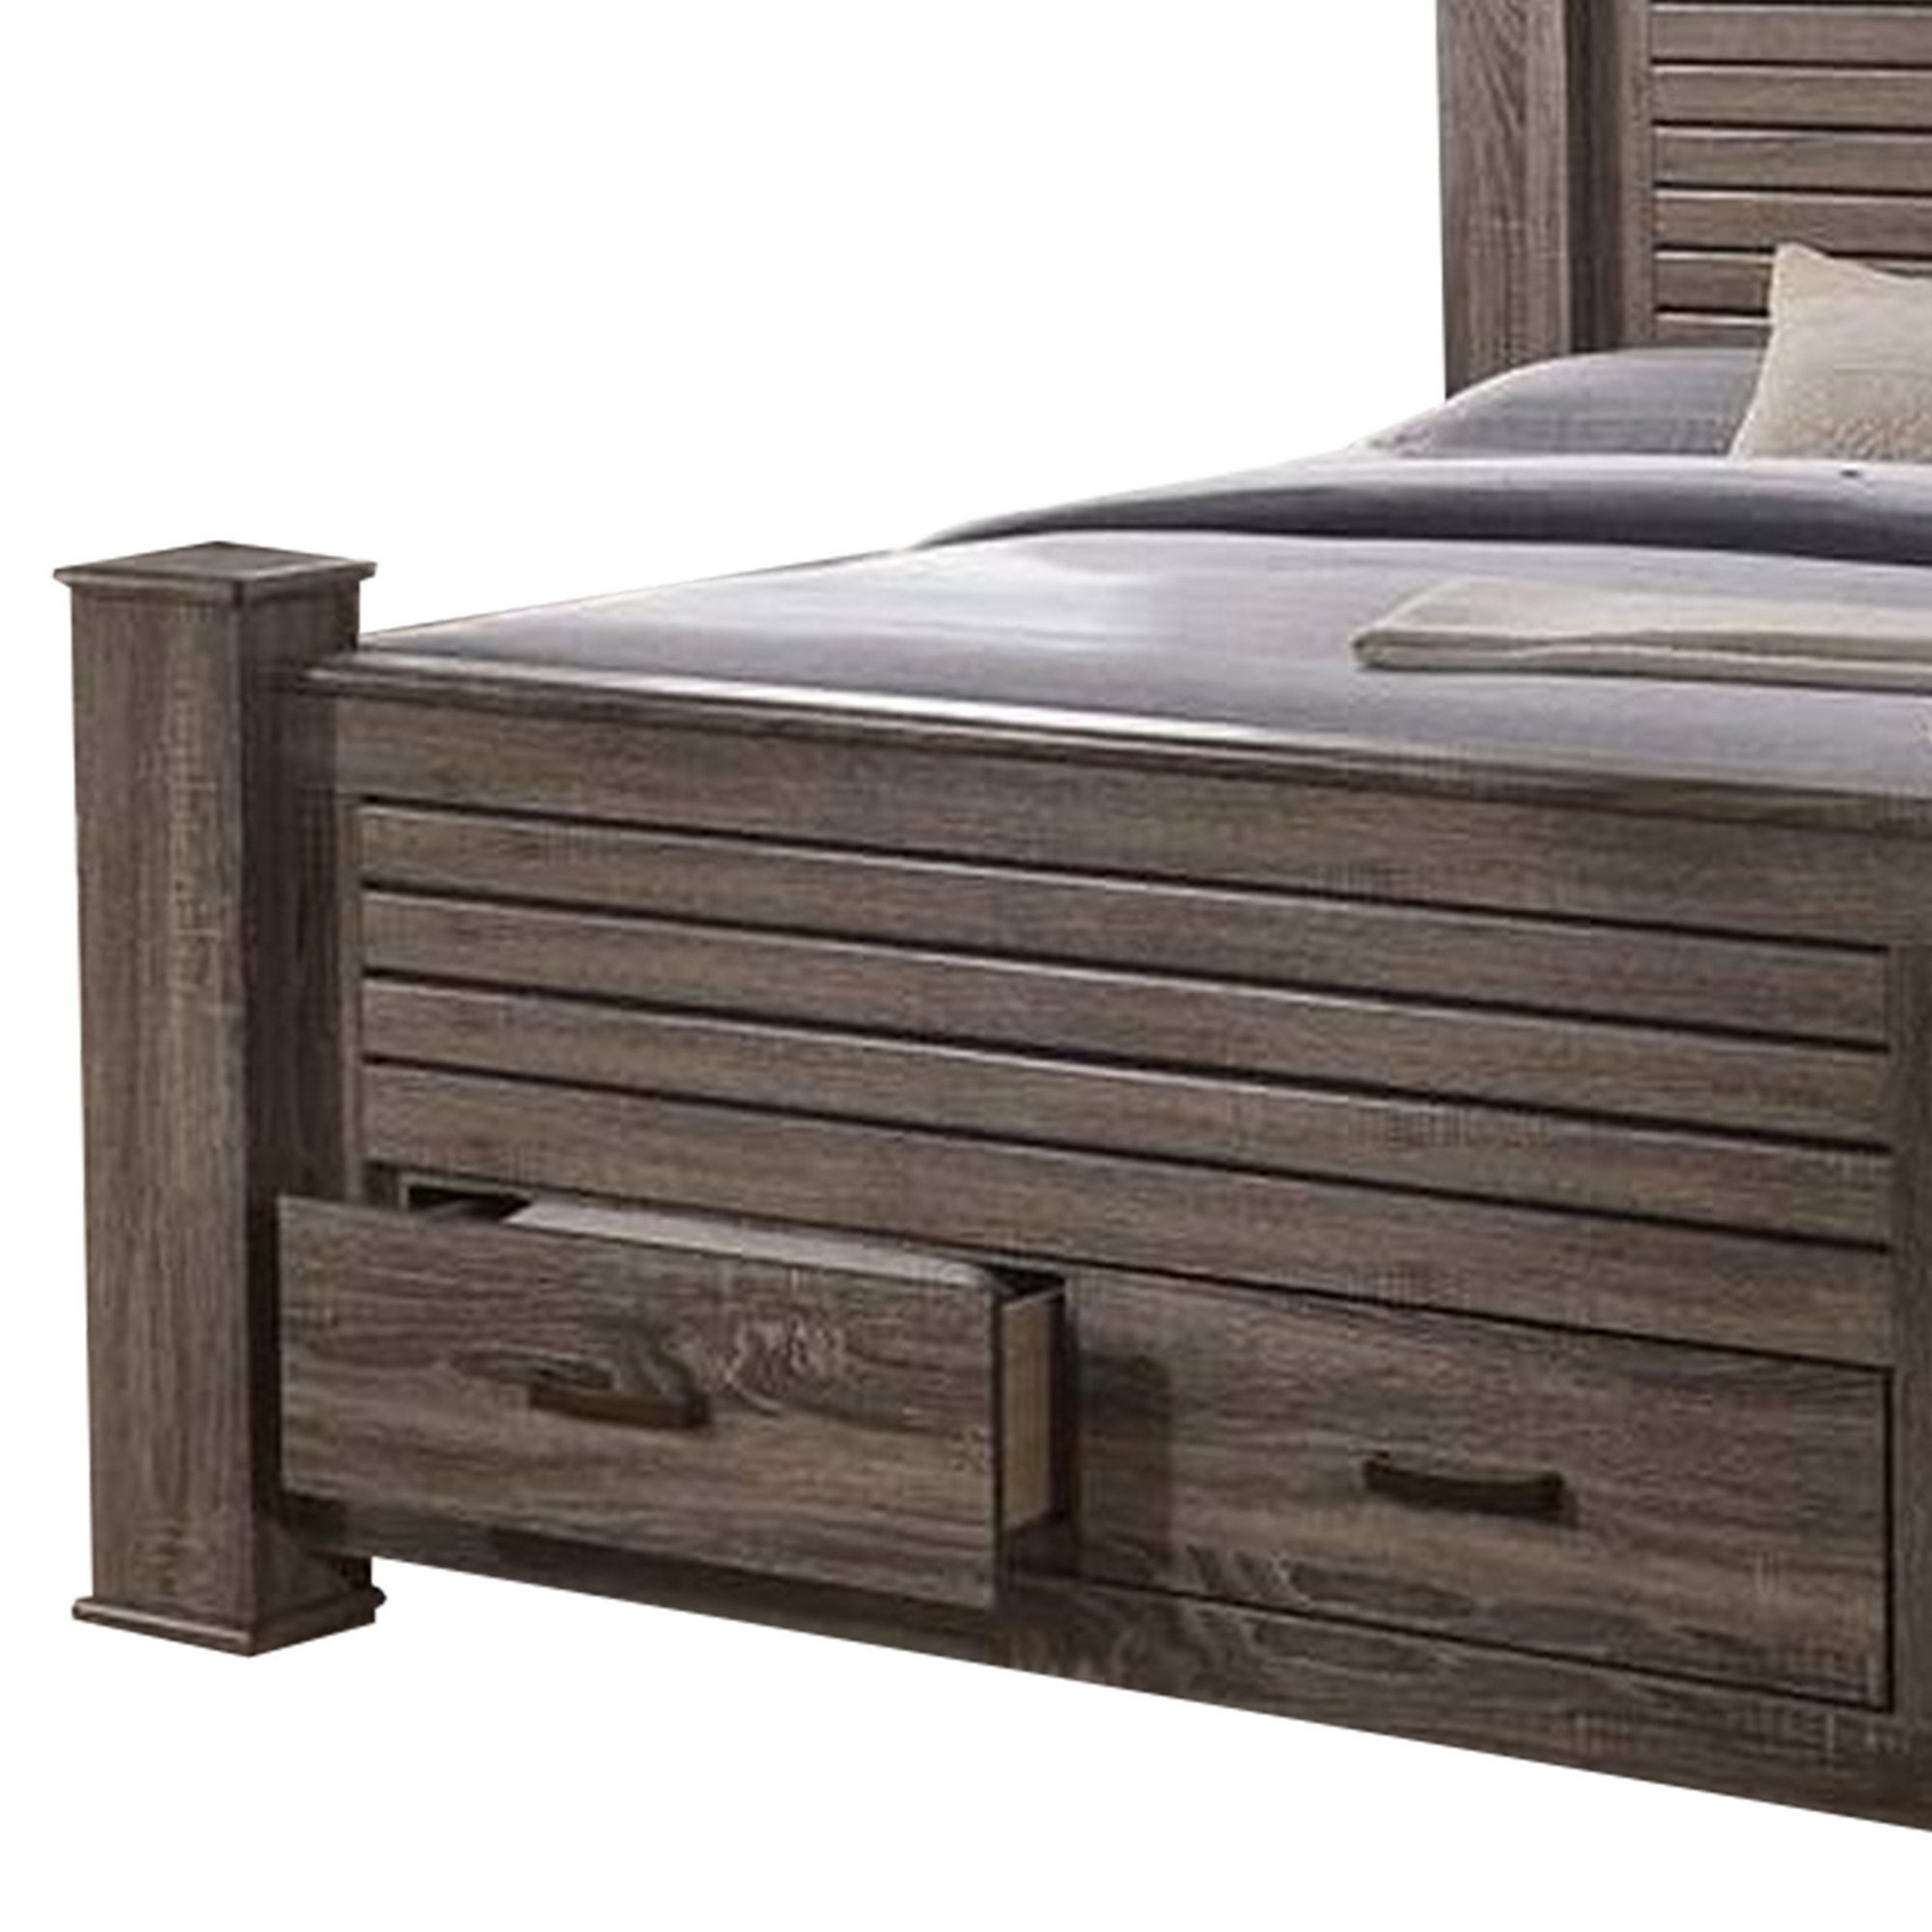 Soma Queen Sized Bed With 2 Gliding Drawers, Metal Bar Handles, Oak Gray- Saltoro Sherpi